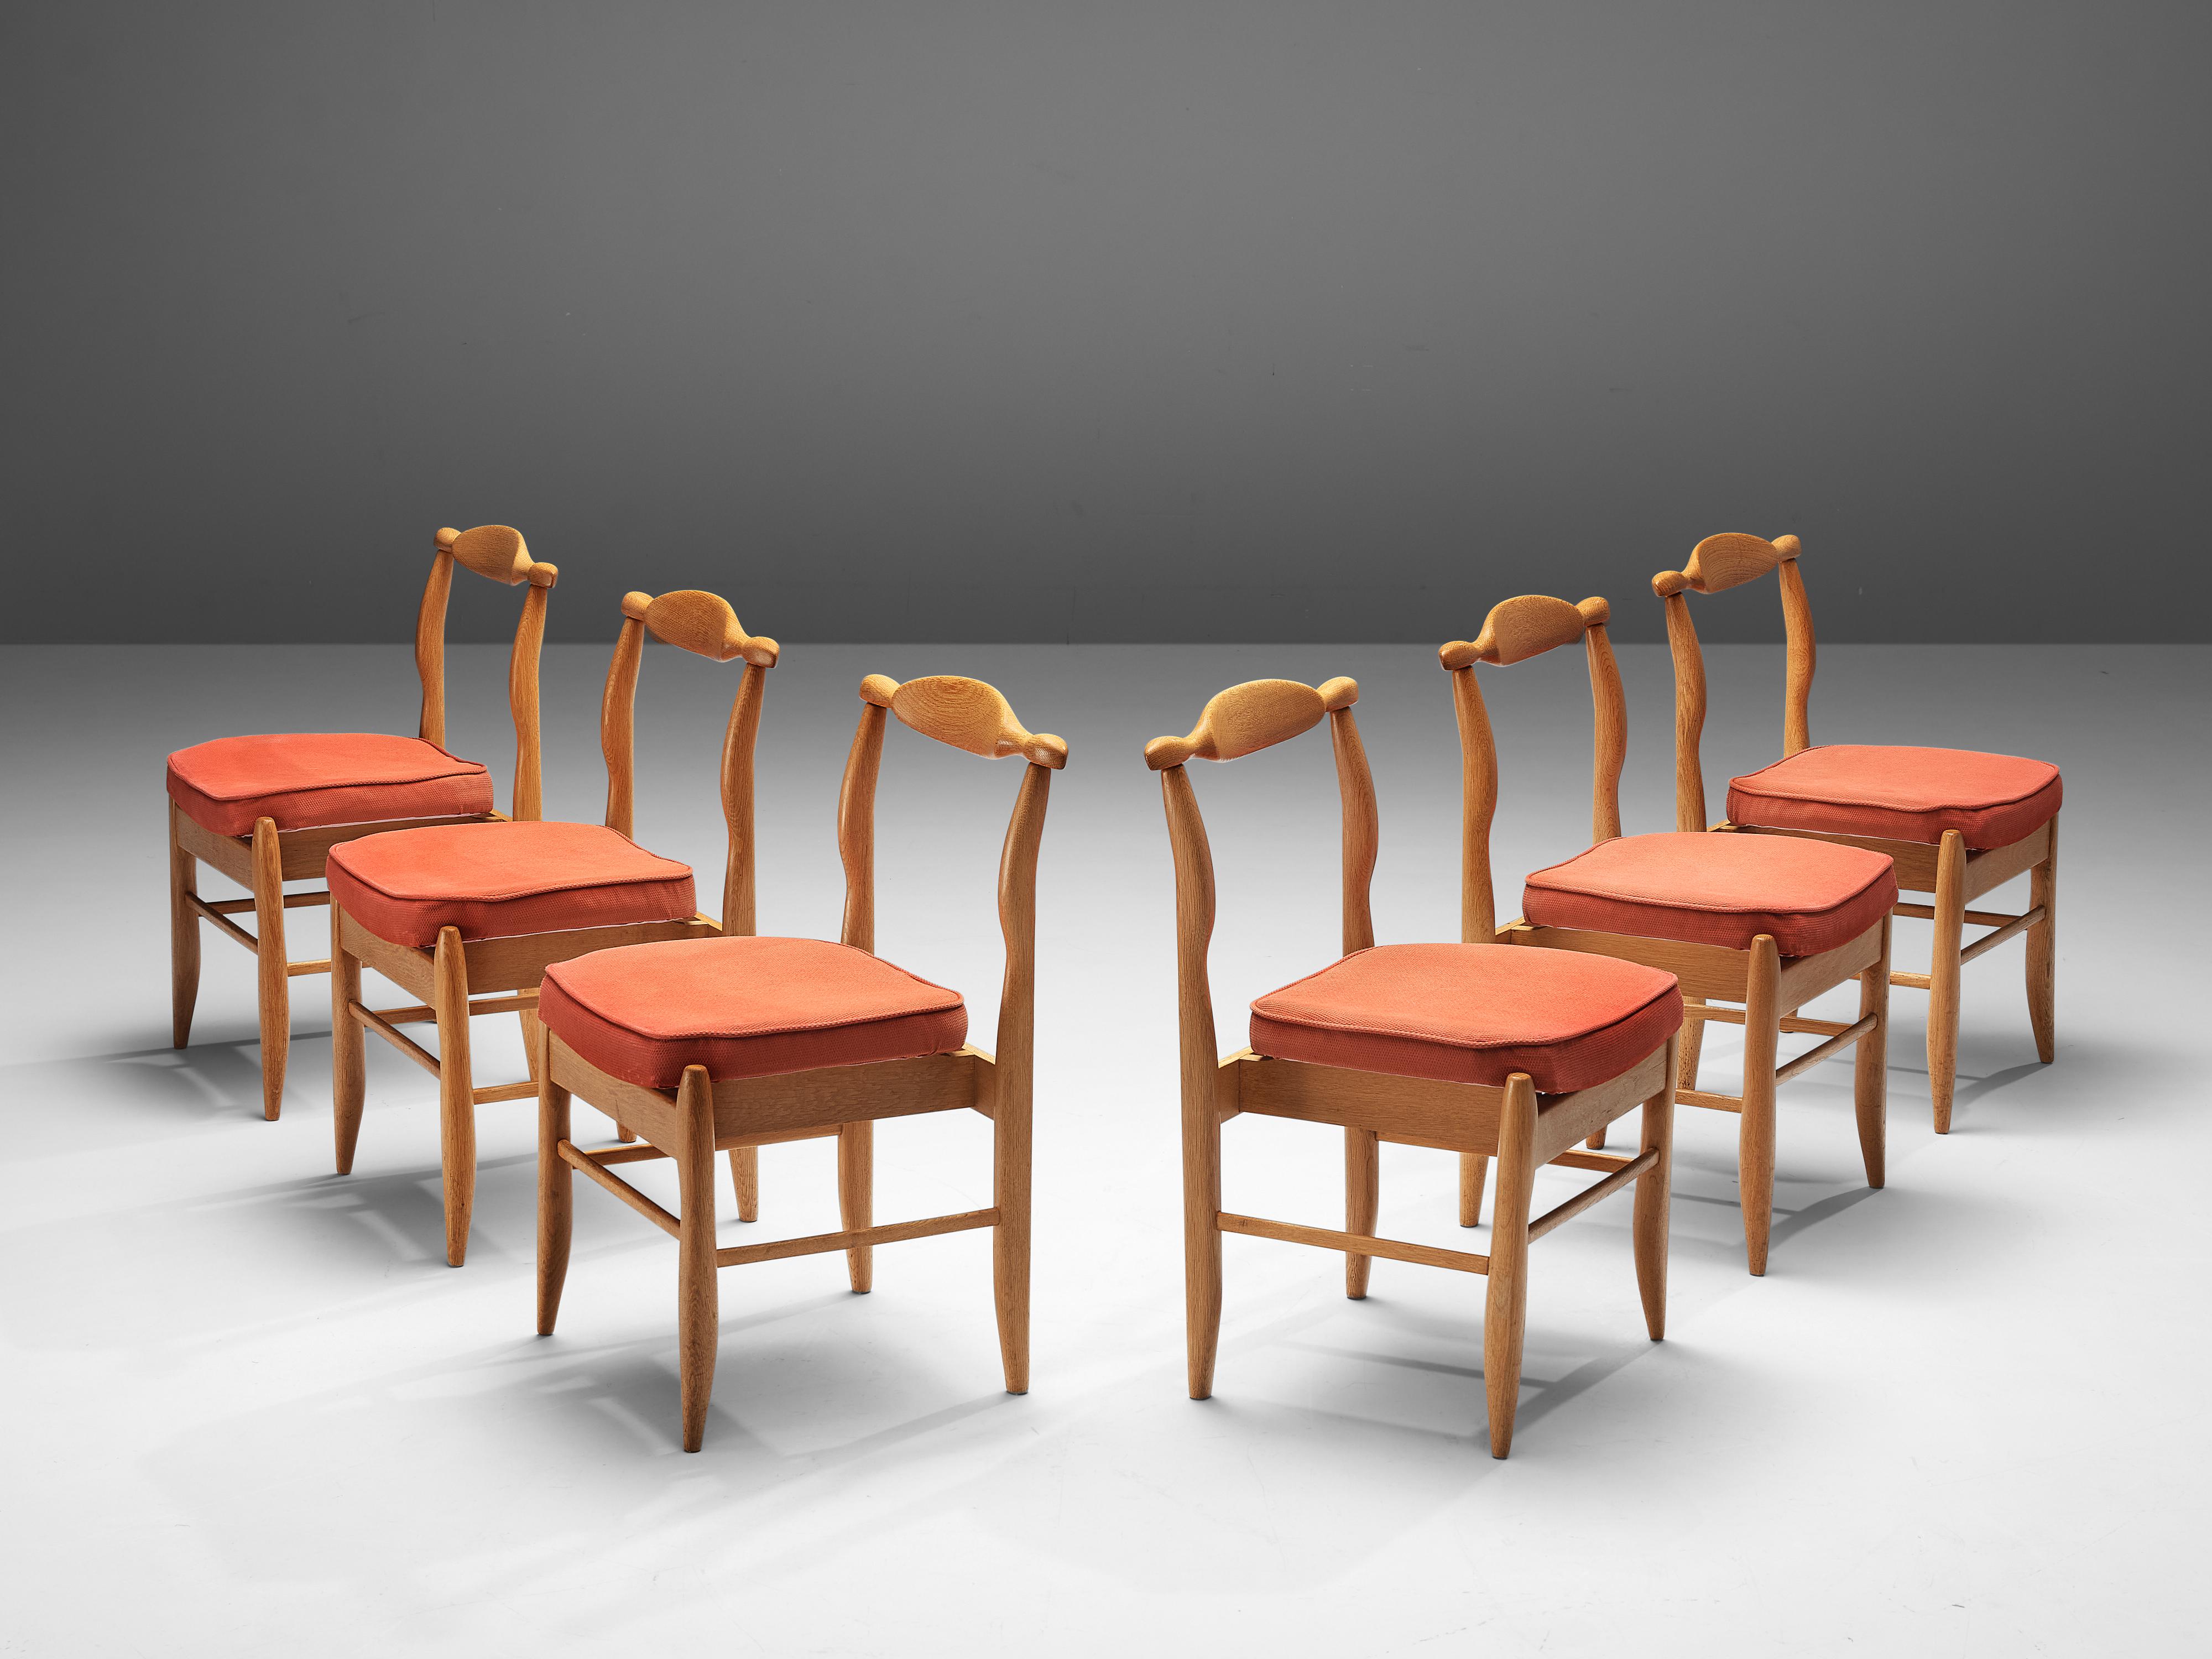 Guillerme et Chambron for Votre Maison, set of six dining chairs, model 'Fumay', oak, fabric, France, 1960s

Beautifully shaped chairs in oak by French designer duo Jacques Chambron and Robert Guillerme. These dining chairs show beautiful lines in